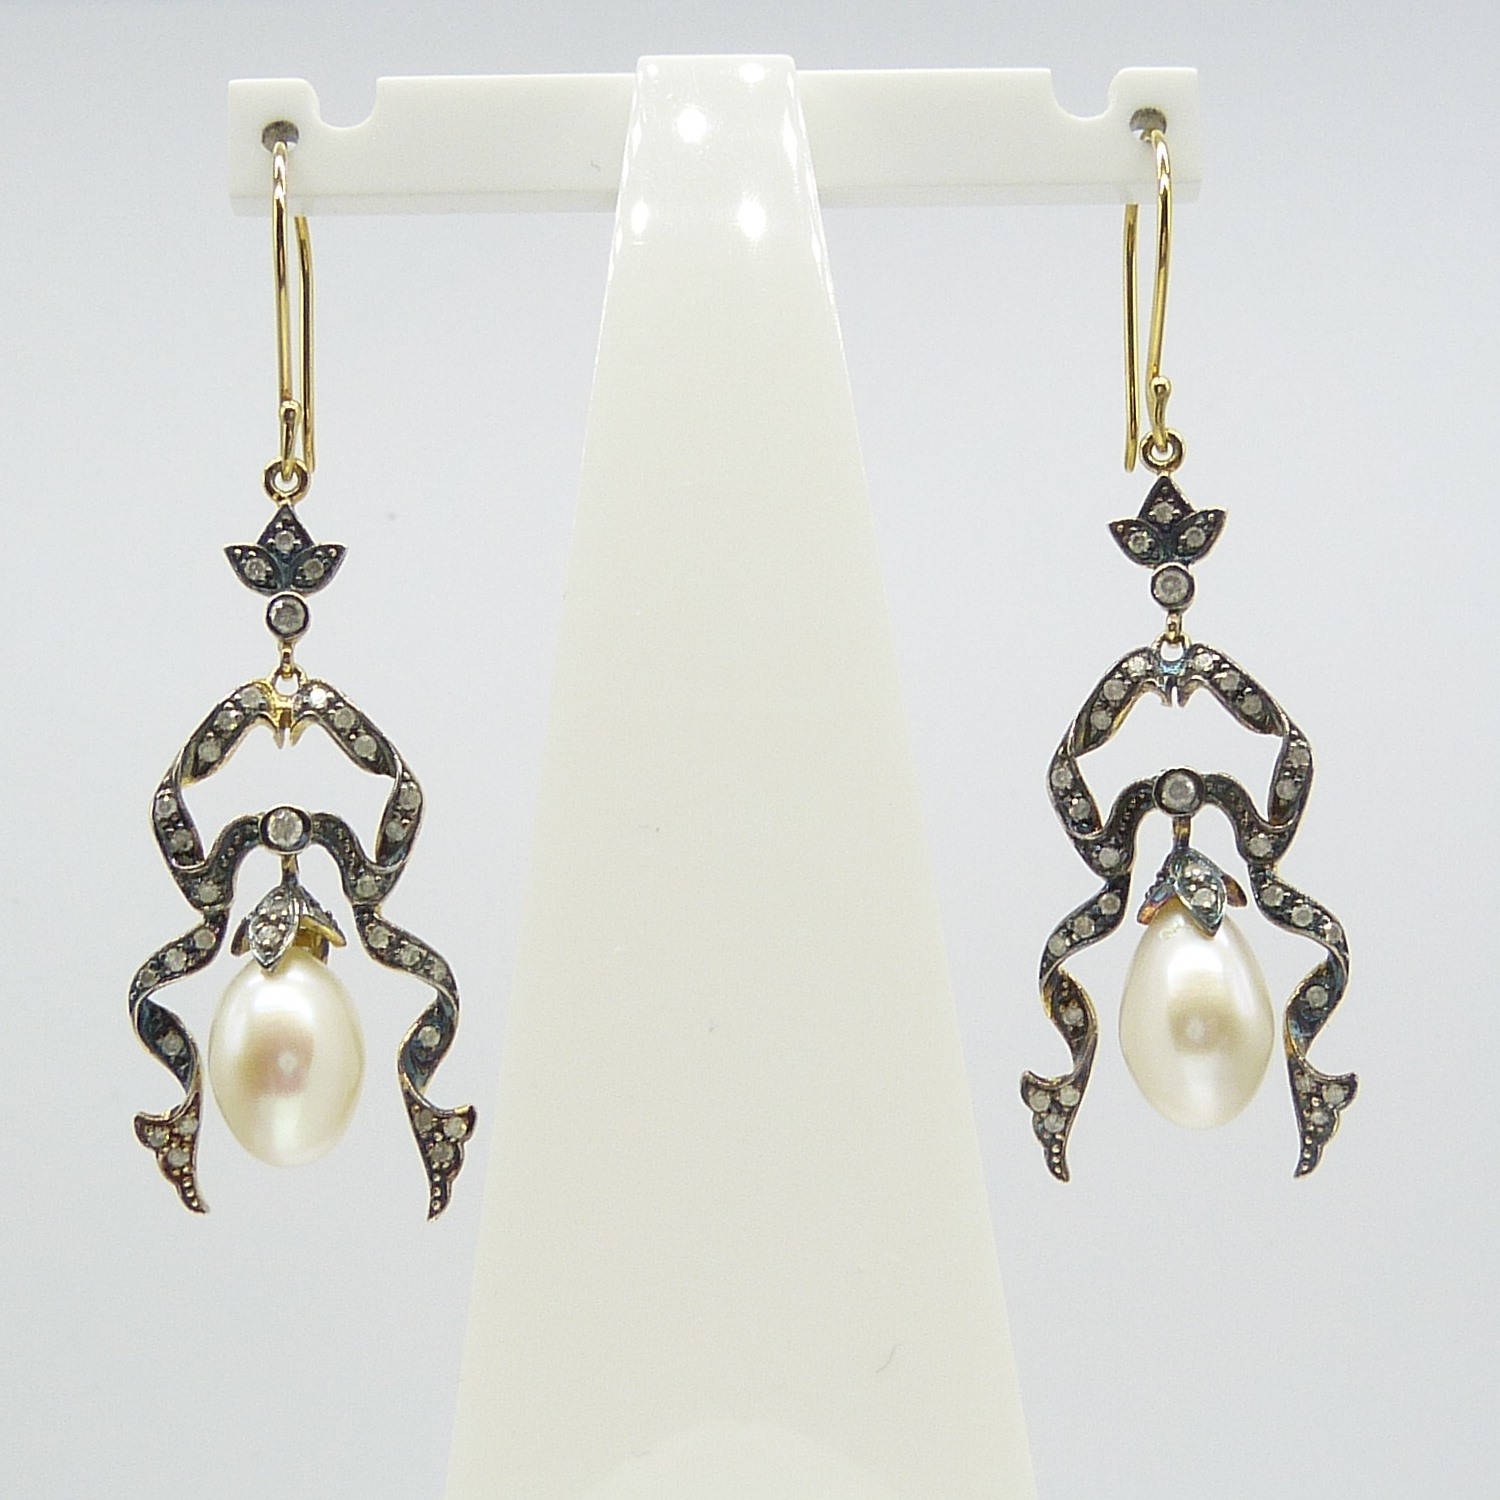 A pair of long drop ribbon-style earrings set with cultured pearls and Diamonds